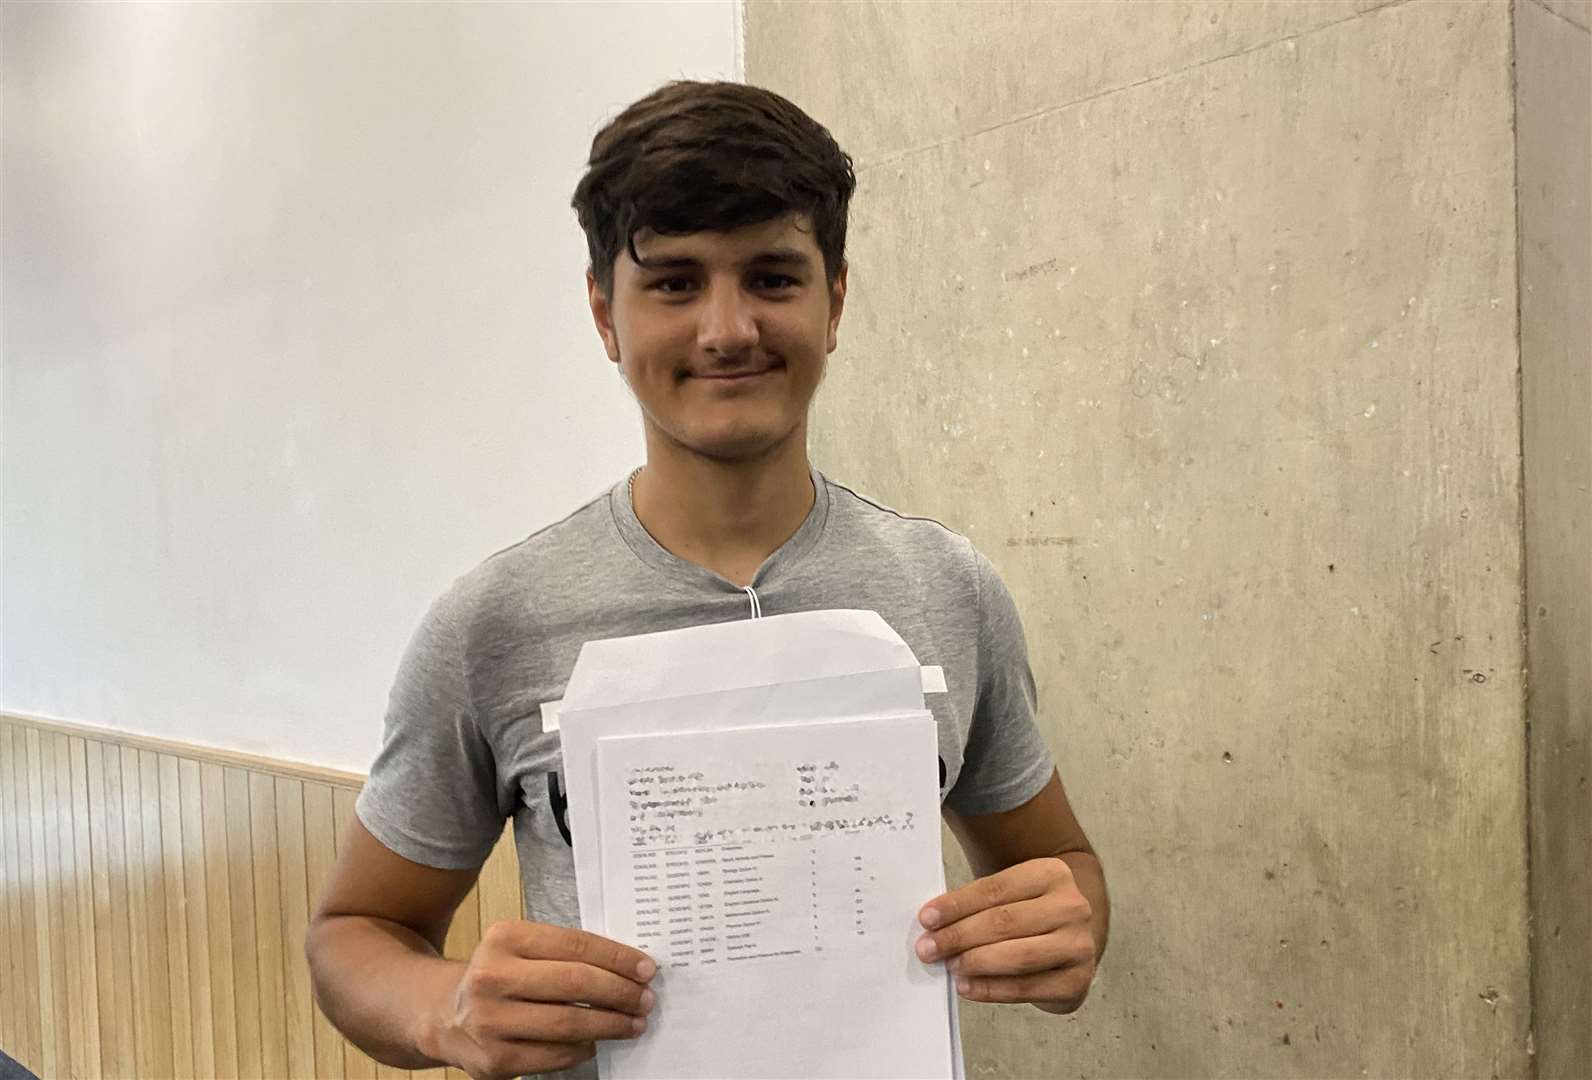 Adam Qureshi receiving his GCSE results at Westminster Academy (Claudia Rowan/PA)